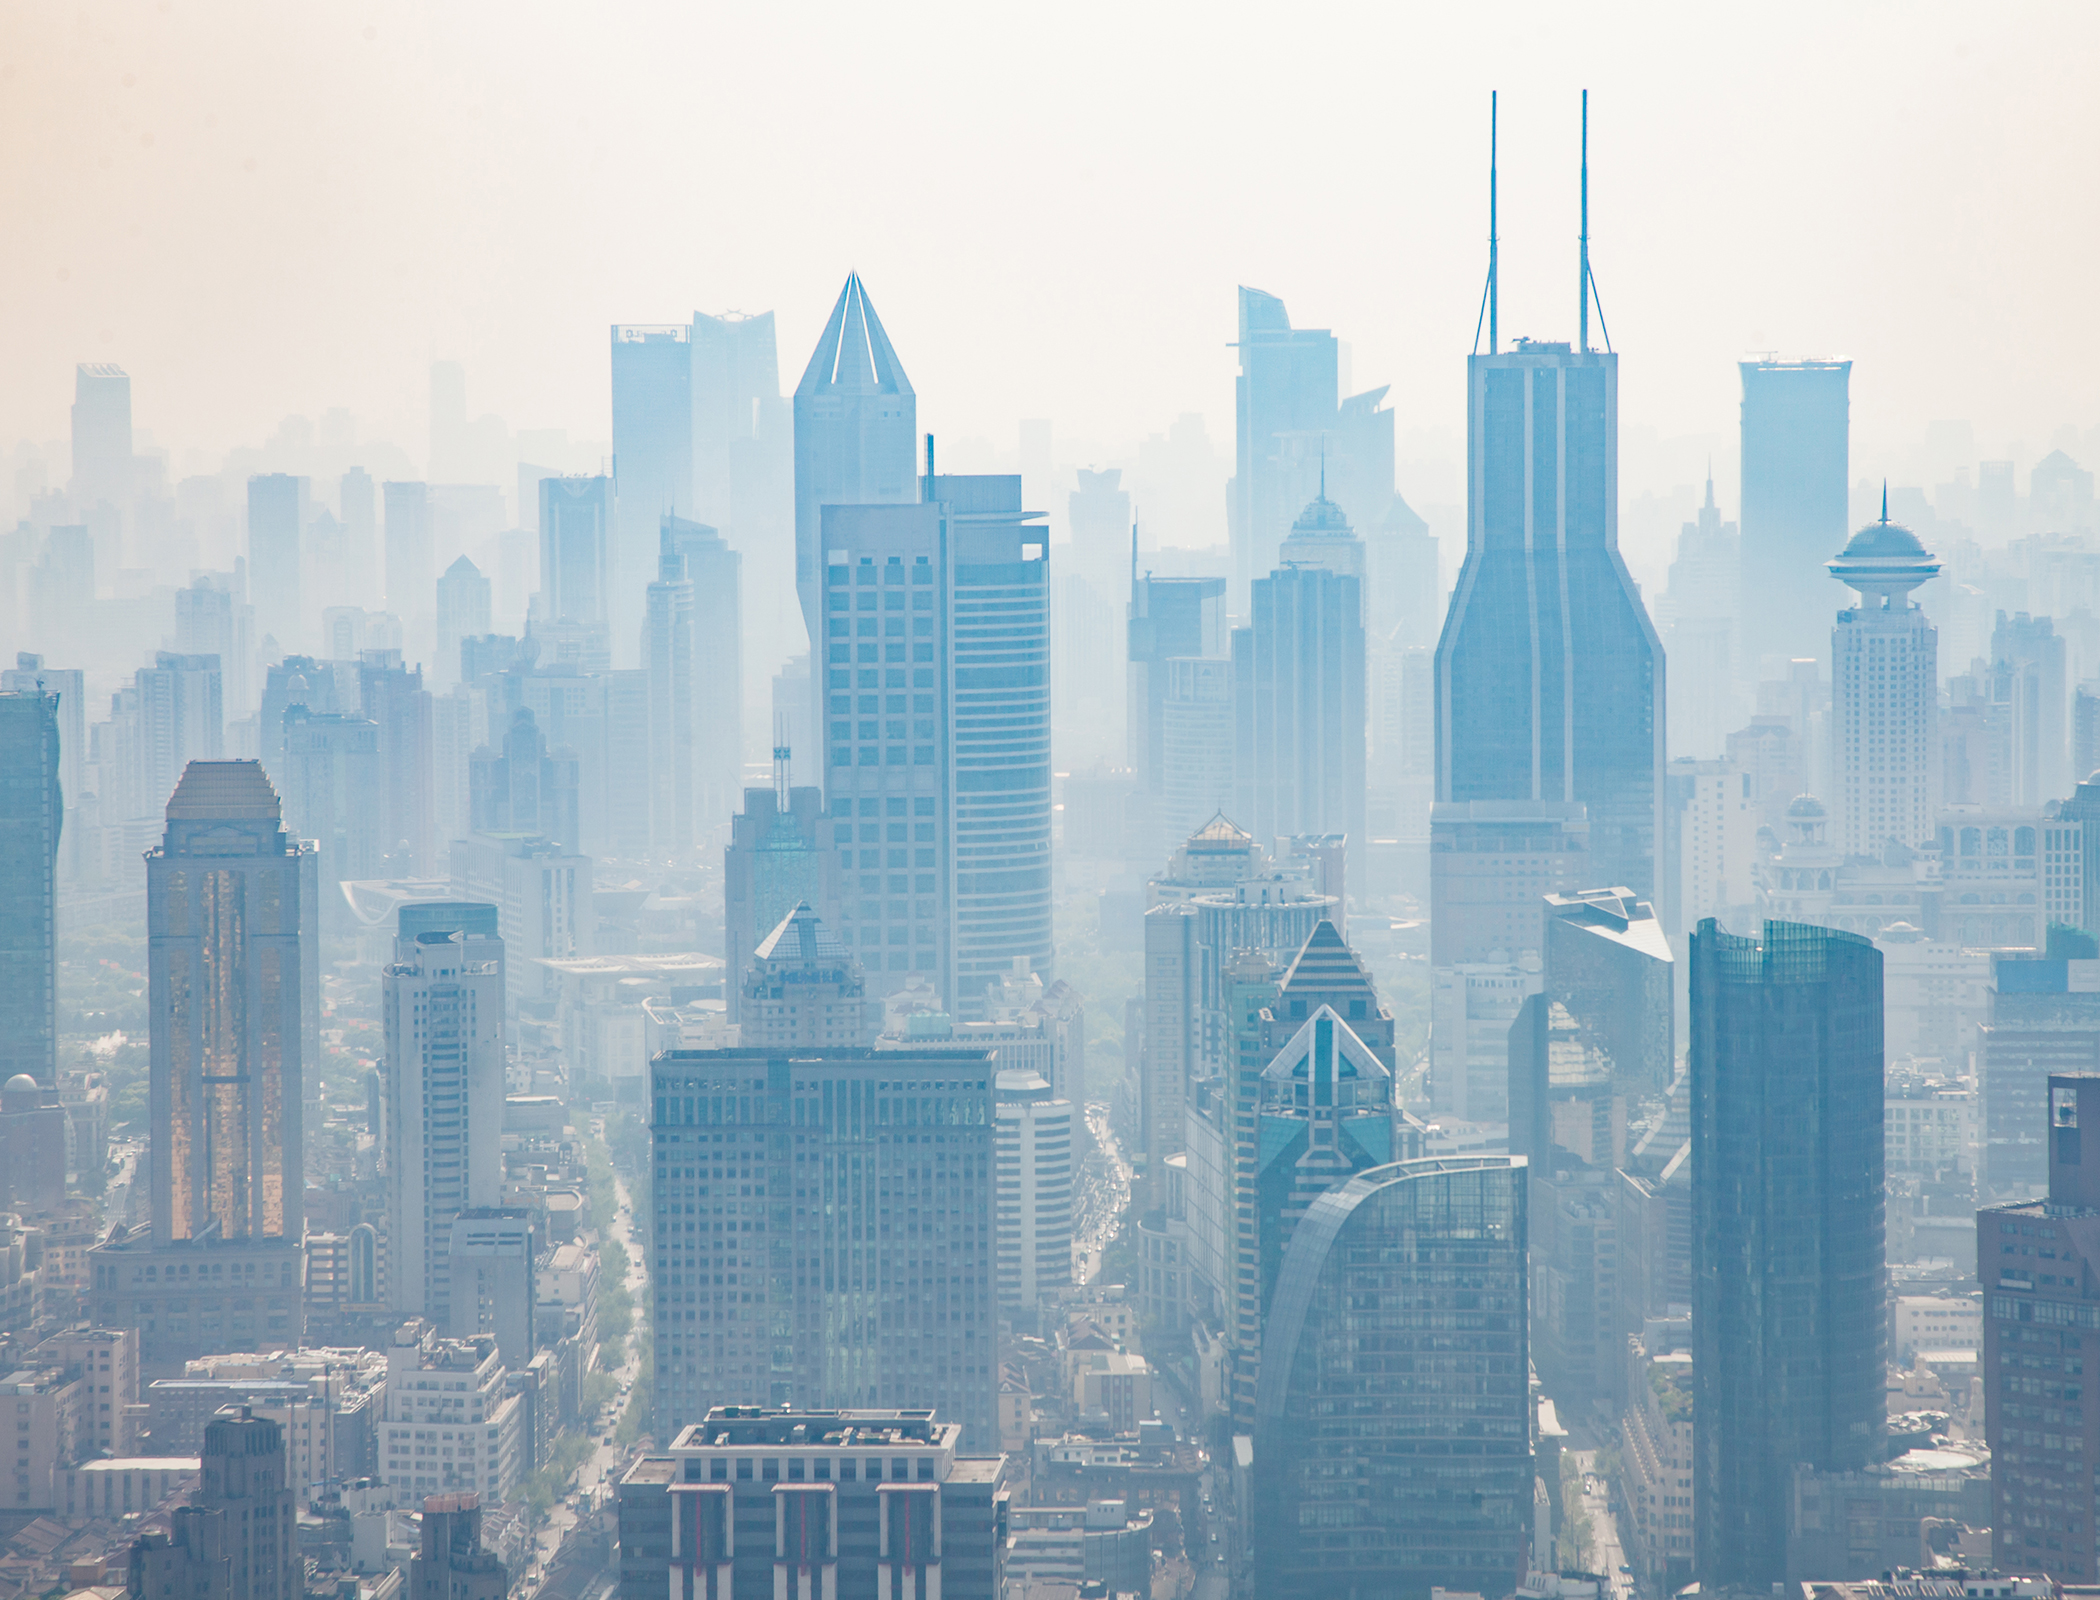 Increased antibiotic resistance linked to higher air pollution